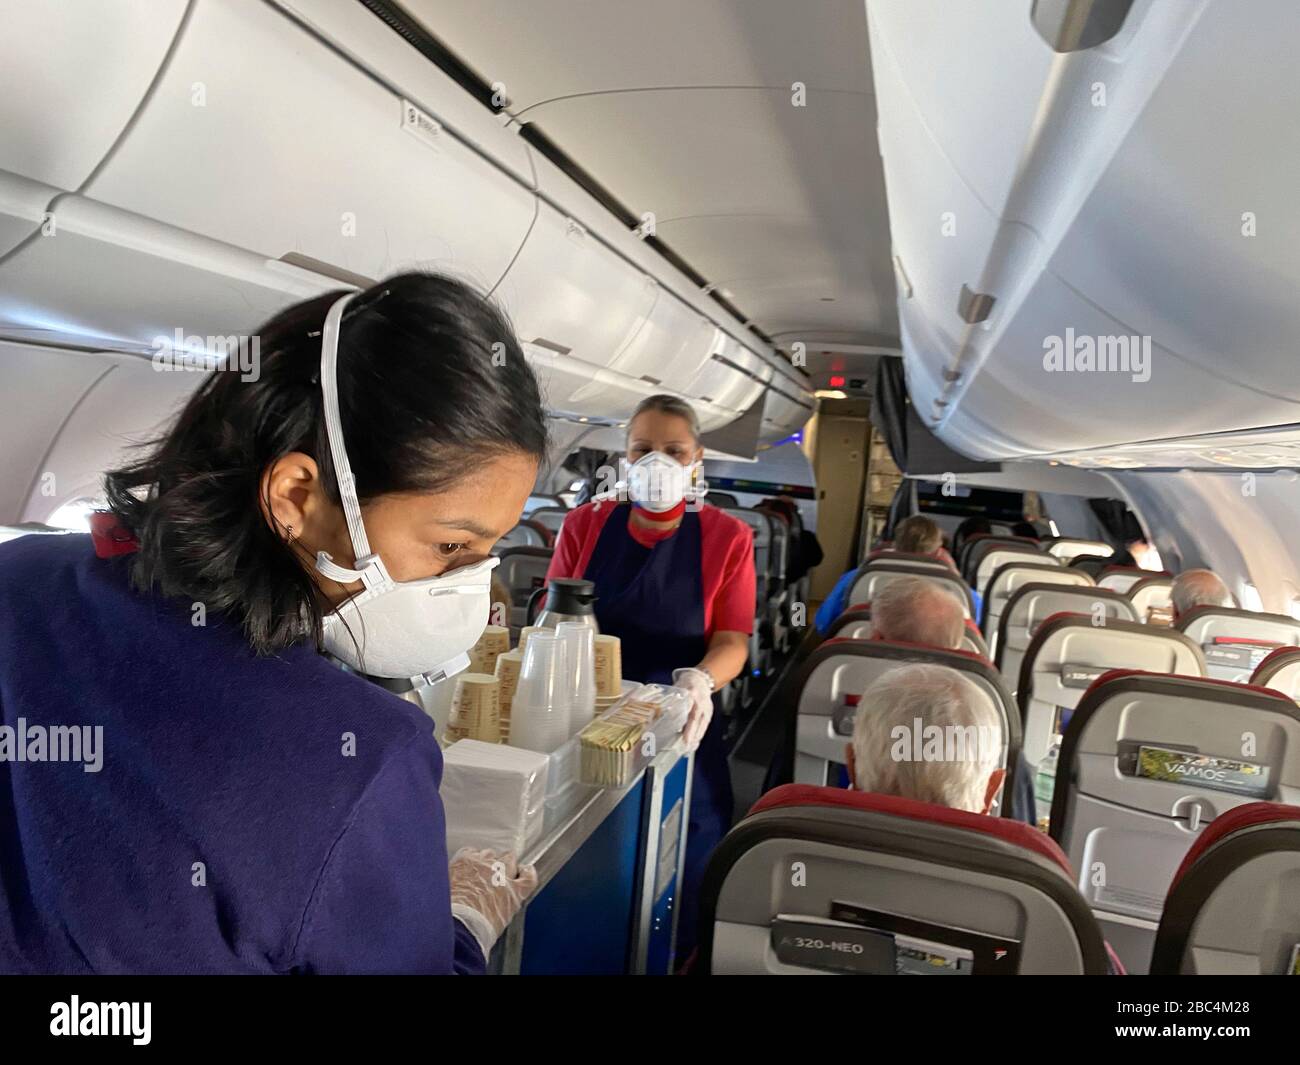 LATAM air attendants use protective gear. As countries and airports shut down, airlines fly trapped passengers on empty flights before closing operations amid an outbreak of the new corona virus COVID-19. The World Health Organization (WHO) declared COVID-19 a pandemic, globally widespread on March 11. Stock Photo